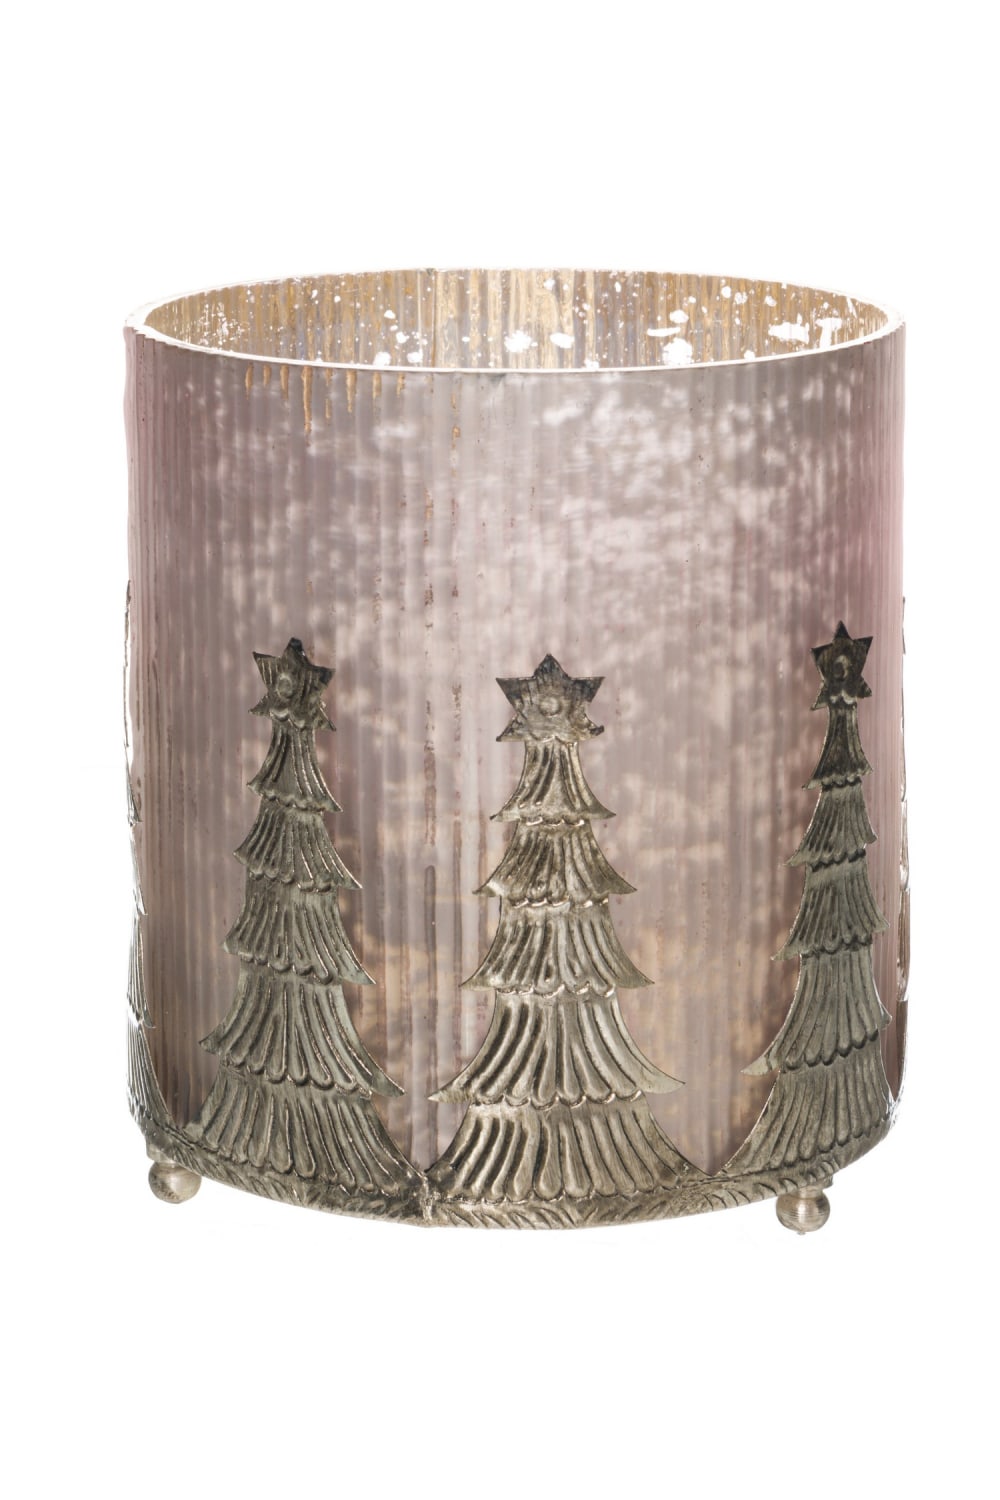 The Noel Collection Christmas Candle Holder - 14cm x 13cm x 13cm